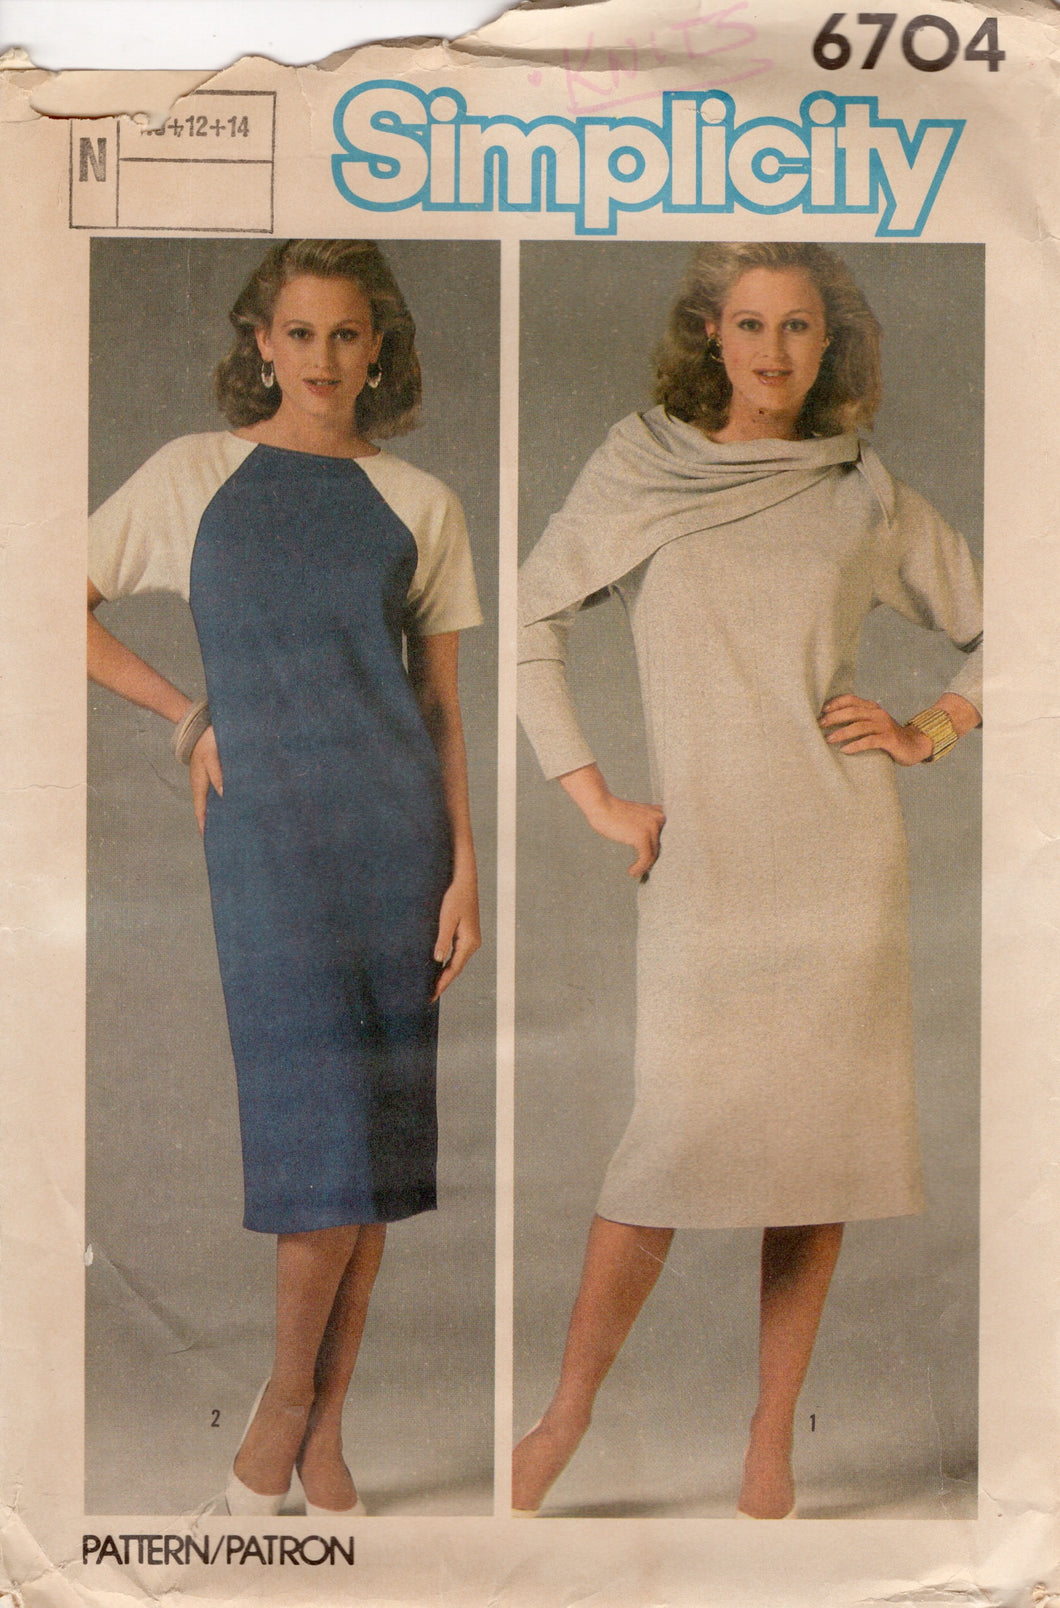 1980's Simplicity One Piece Dress pattern with Raglan Sleeves and Scarf - Bust 32.5-34